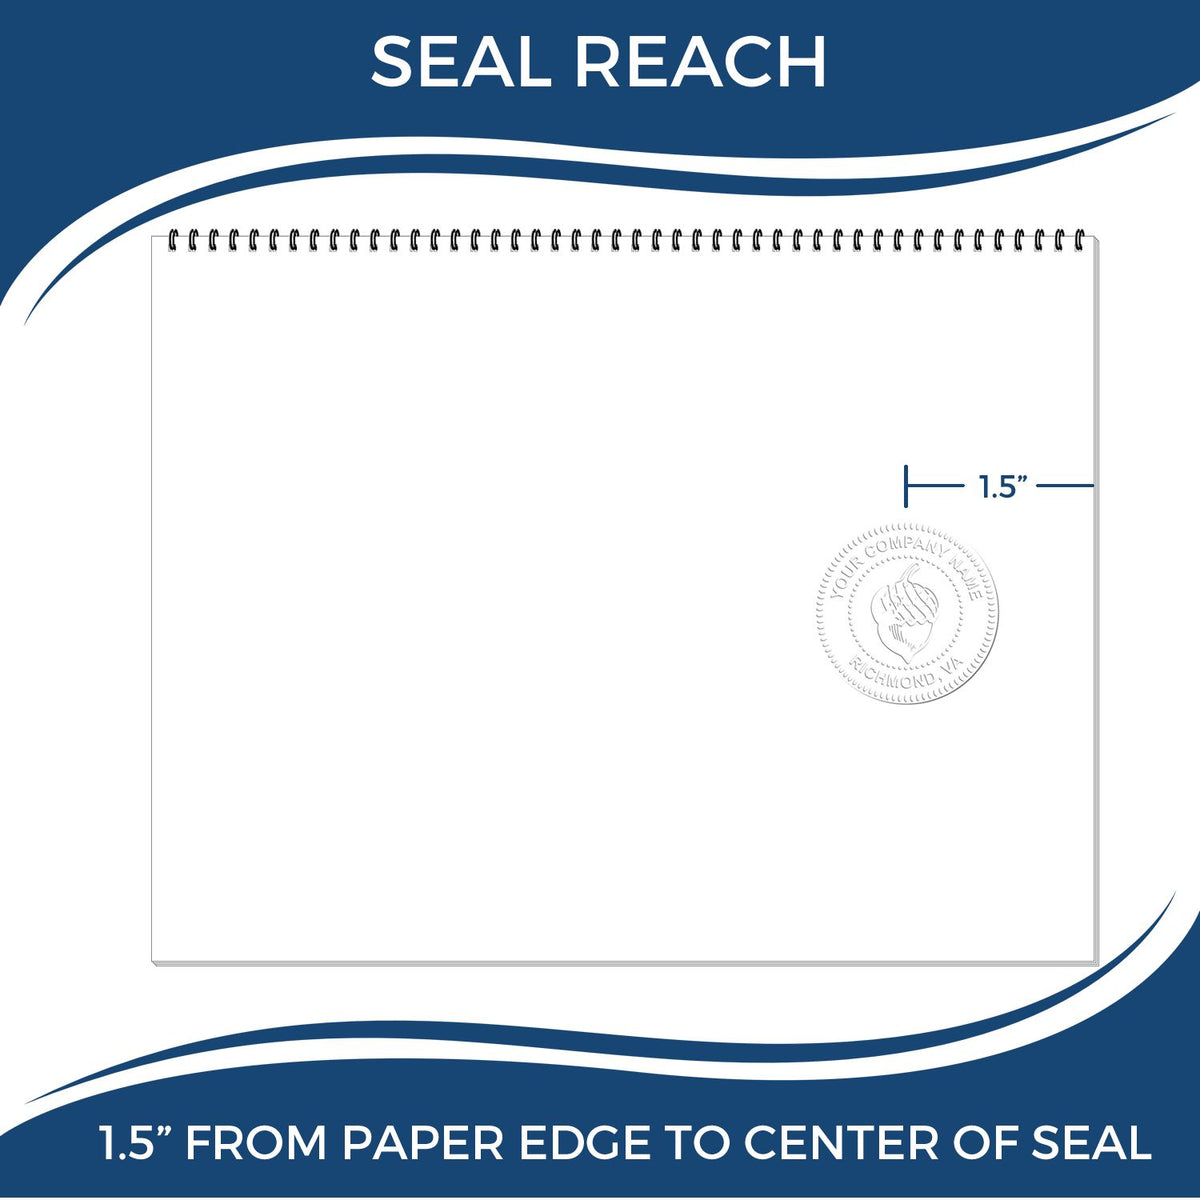 An infographic showing the seal reach which is represented by a ruler and a miniature seal image of the Hybrid Kansas Engineer Seal